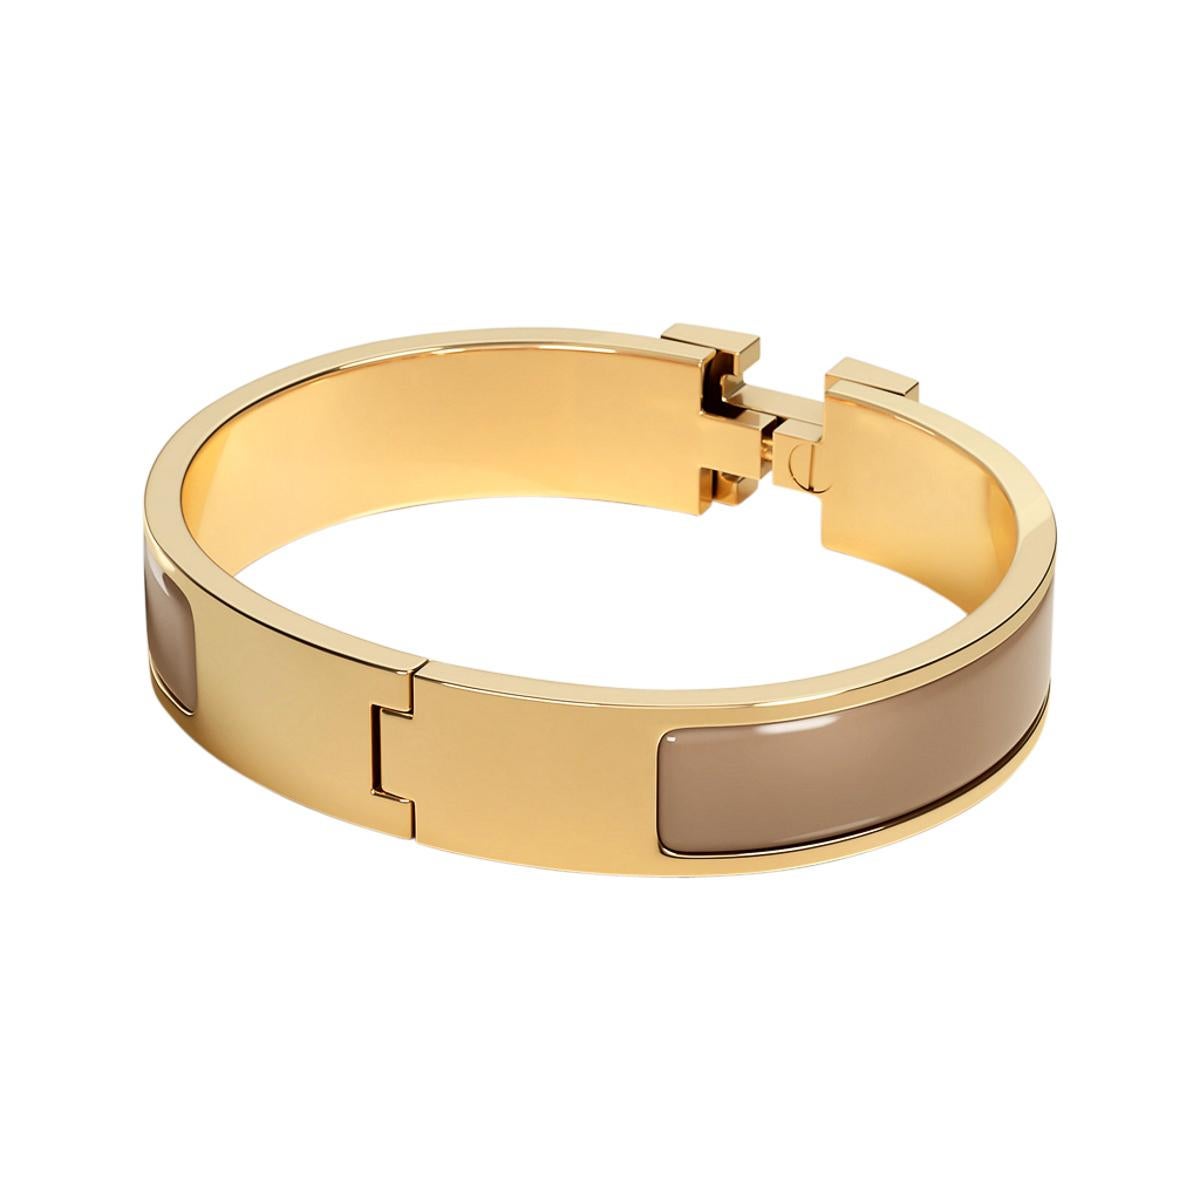 Mightychic offers an Hermes Clic H Bracelet featured in Marron Glace Enamel.
Set in Gold plated hardware.
Chic, modern and unmistakably Hermes!
A hinged band allows the H to swivel and open the bracelet.
Comes with pouch and signature Hermes